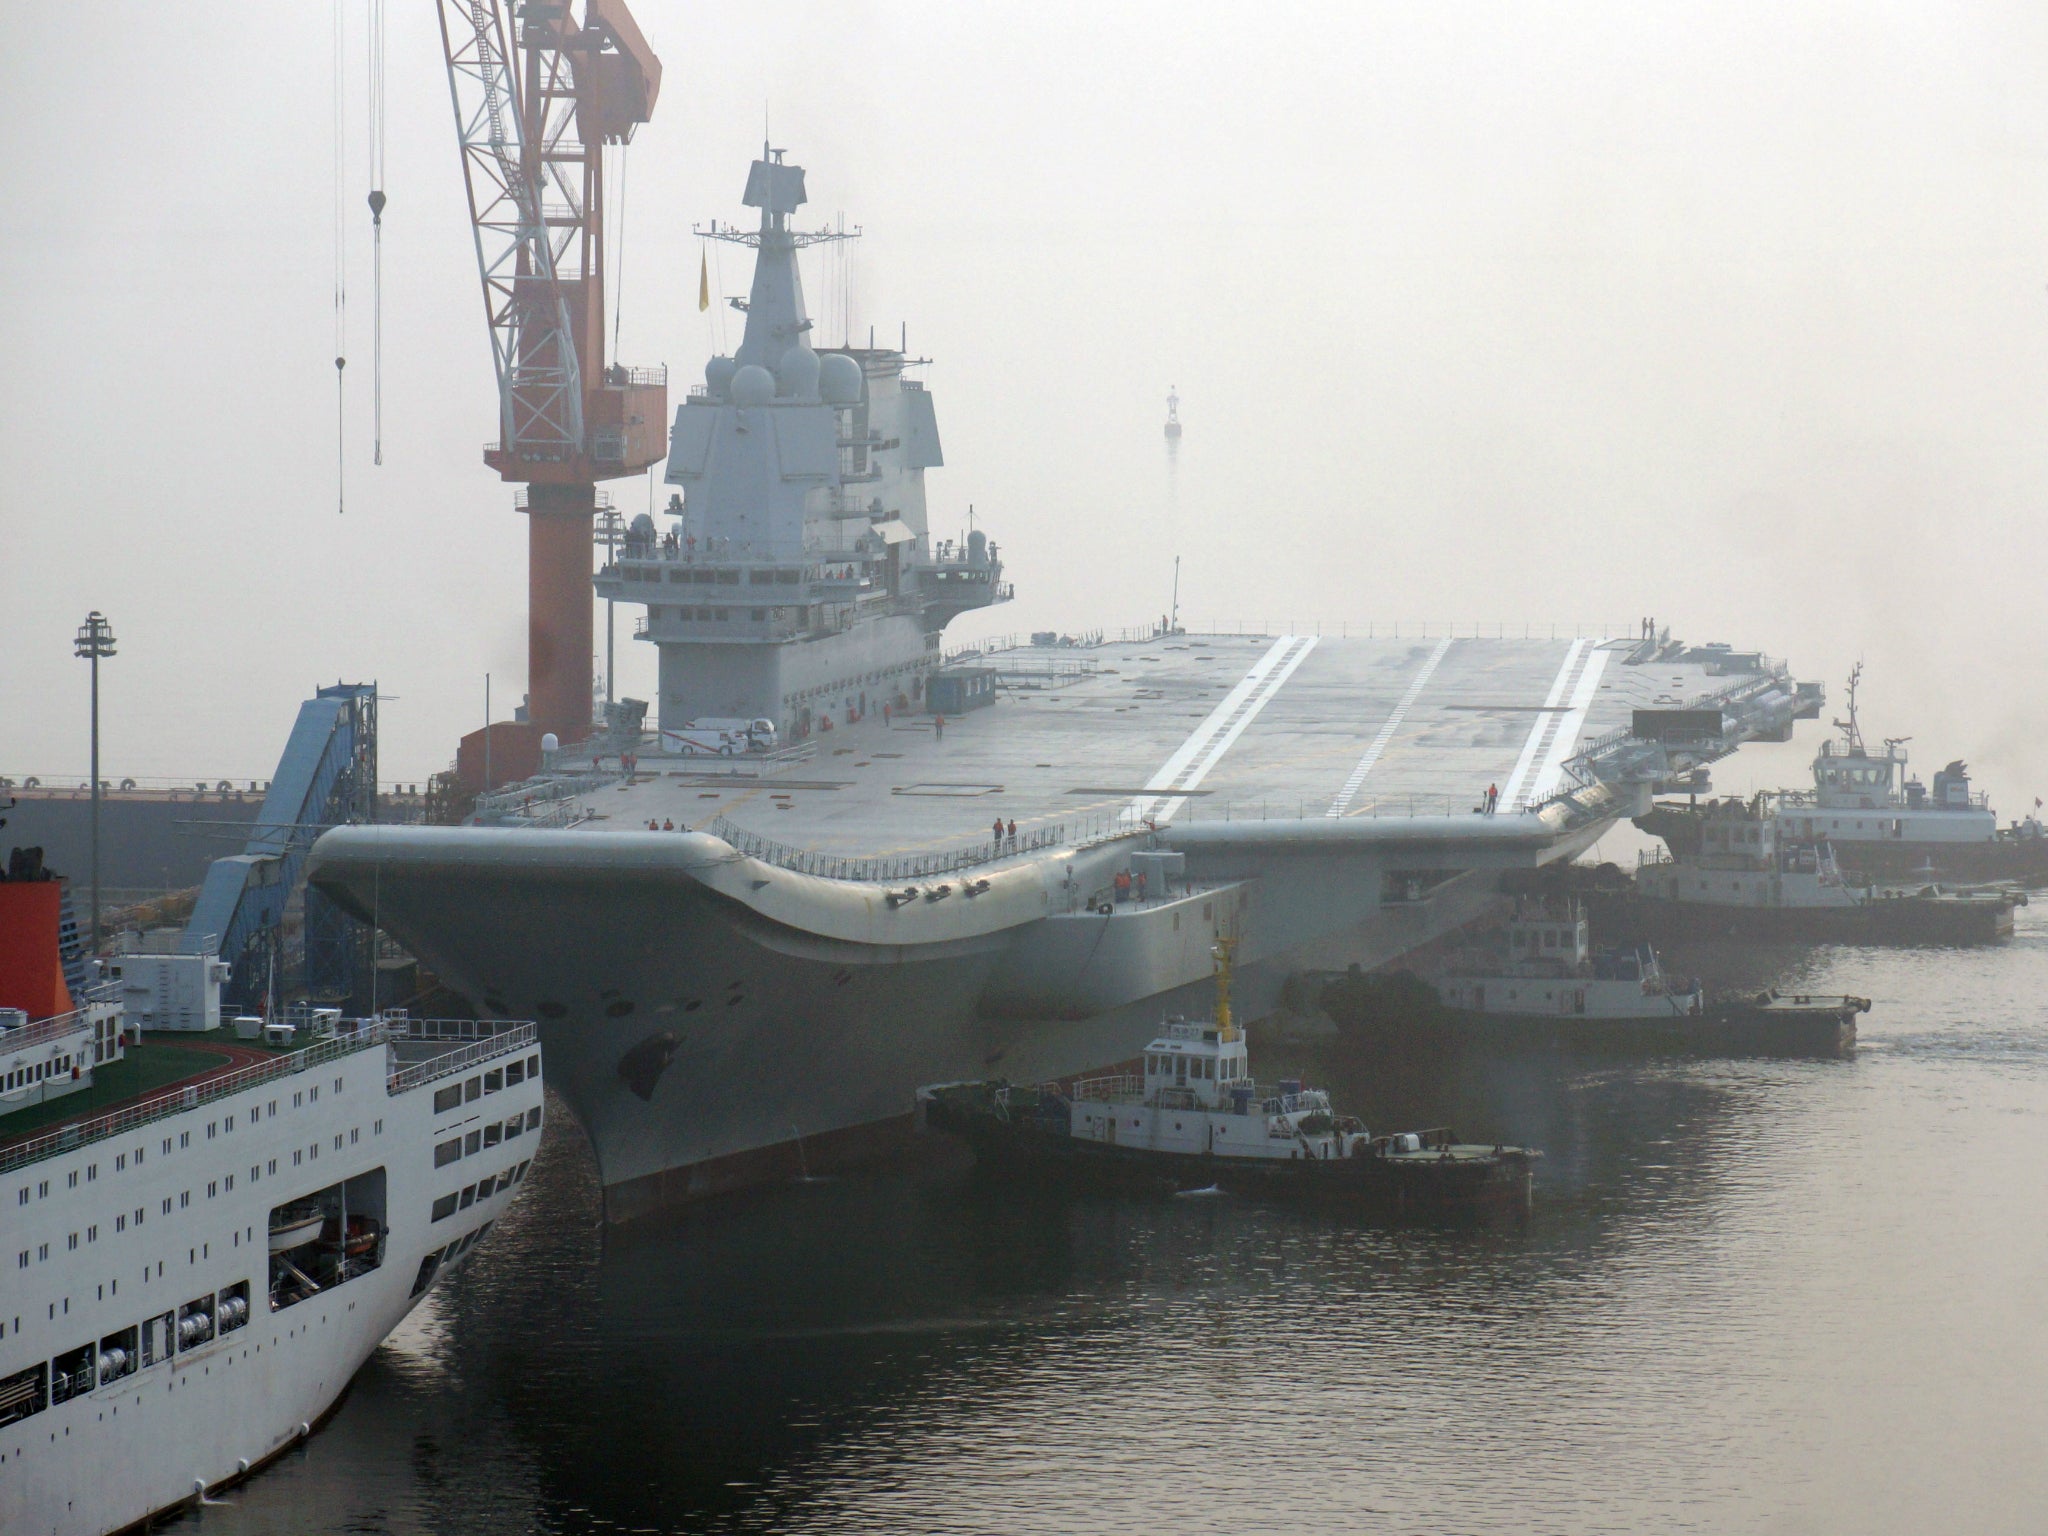 China's first home-built aircraft carrier sets out from a port of Dalian for sea trials on 13 May 2018